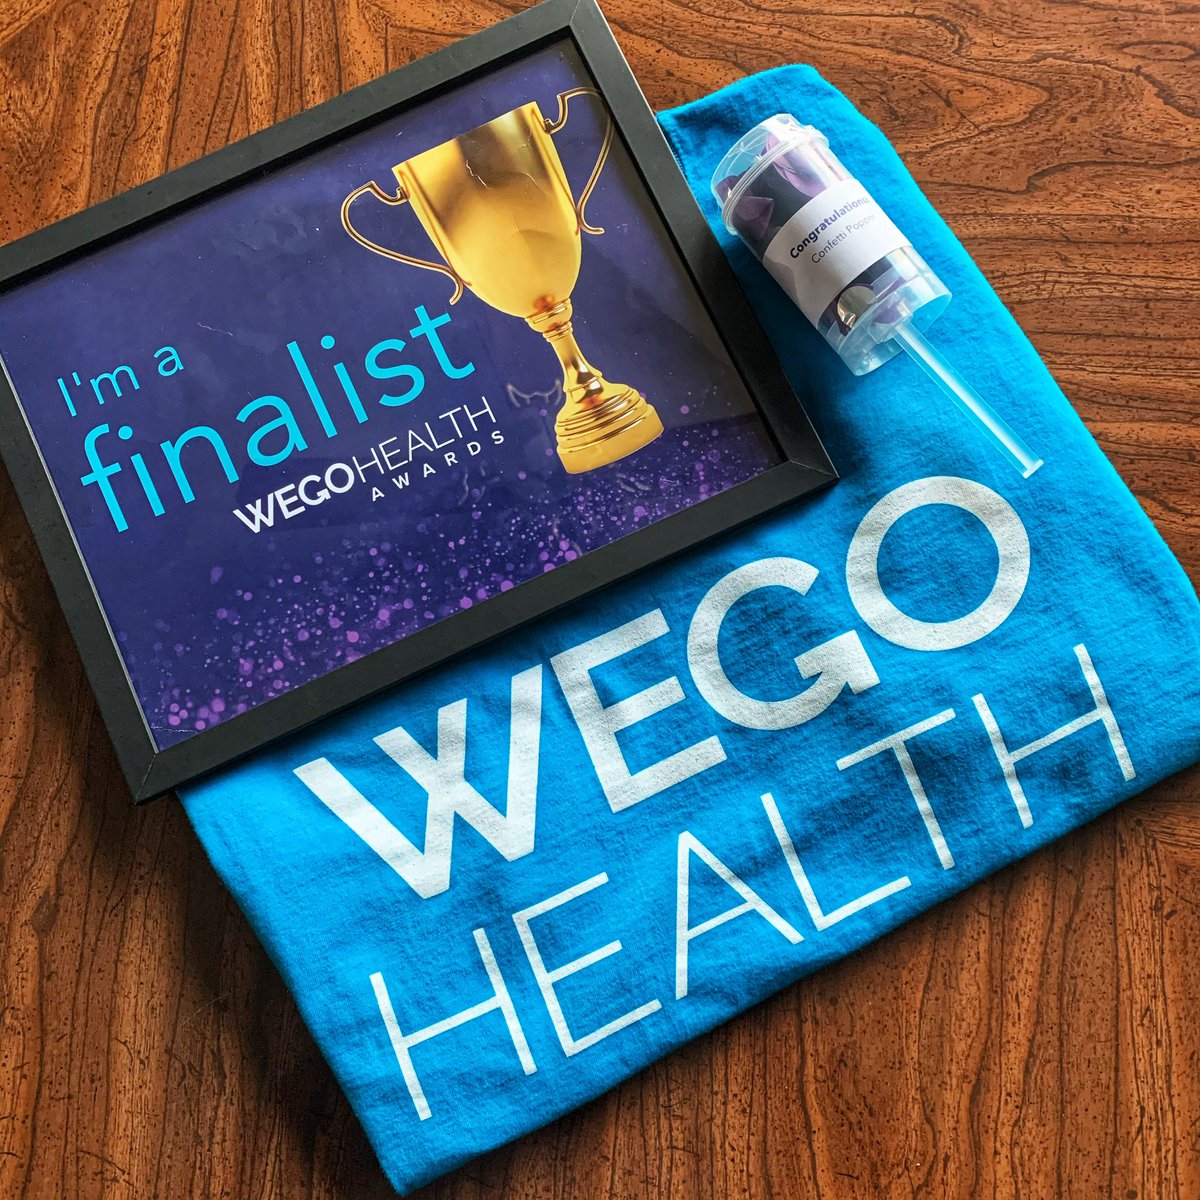 Check out this fun package that arrived in the mail from @wegohealth! 💌 I’m honored to have been chosen as “Patient Leader Hero” Finalist in this years #WEGOHealthAwards! Those within the #epilepsy community are my heroes and I value your love and support beyond measure!